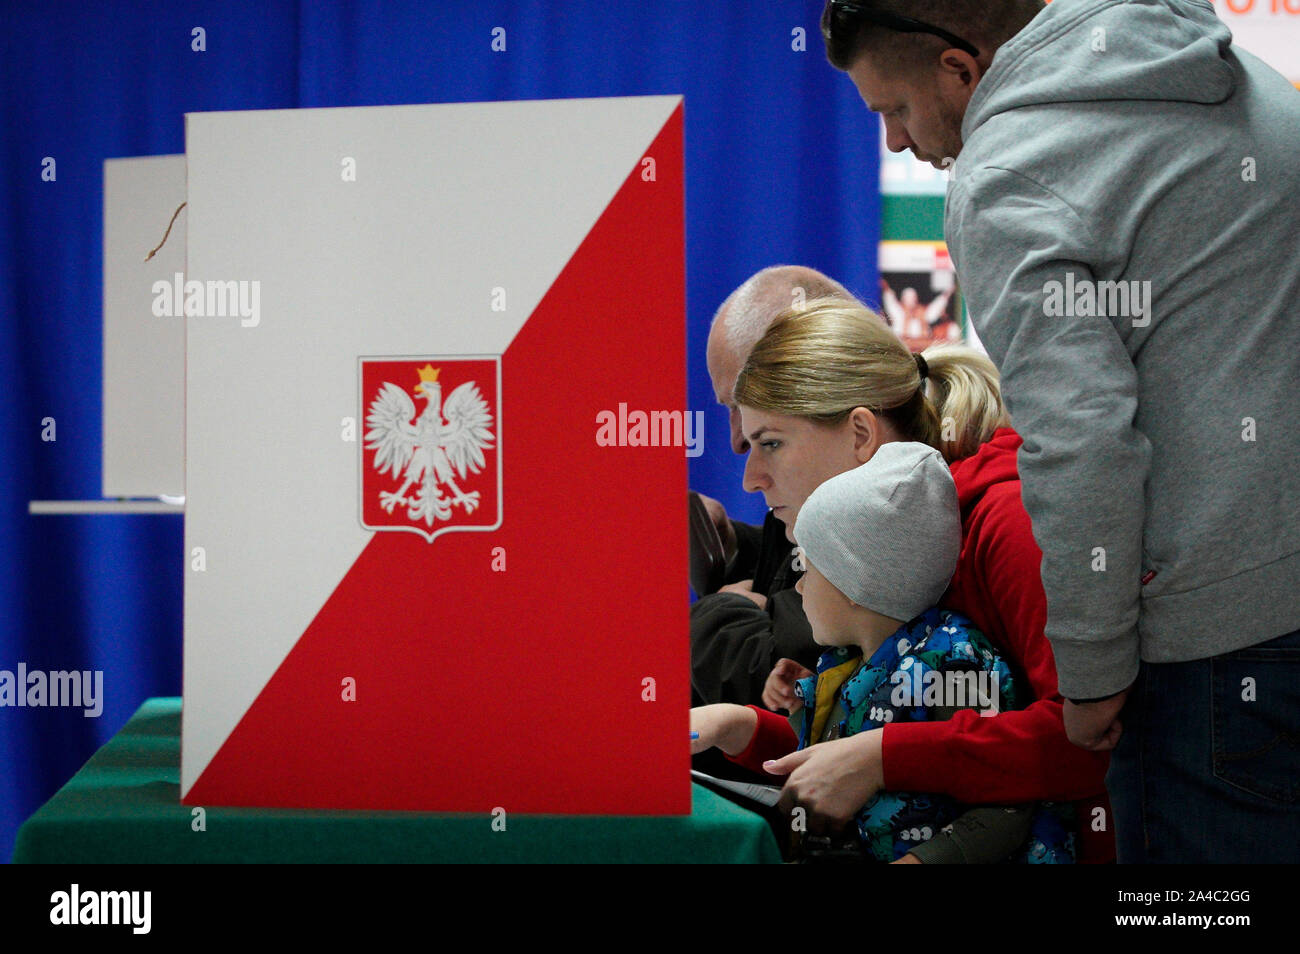 Warsaw, Poland. 13th Oct, 2019. People are seen at a voting station in Warsaw, Poland, on Oct. 13, 2019. The exit poll after the closing of the vote in Poland at 9 p.m. on Sunday indicated governing Law and Justice party (PiS) won 43.6 percent of the vote in the parliamentary election. Credit: Jaap Arriens/Xinhua/Alamy Live News Stock Photo